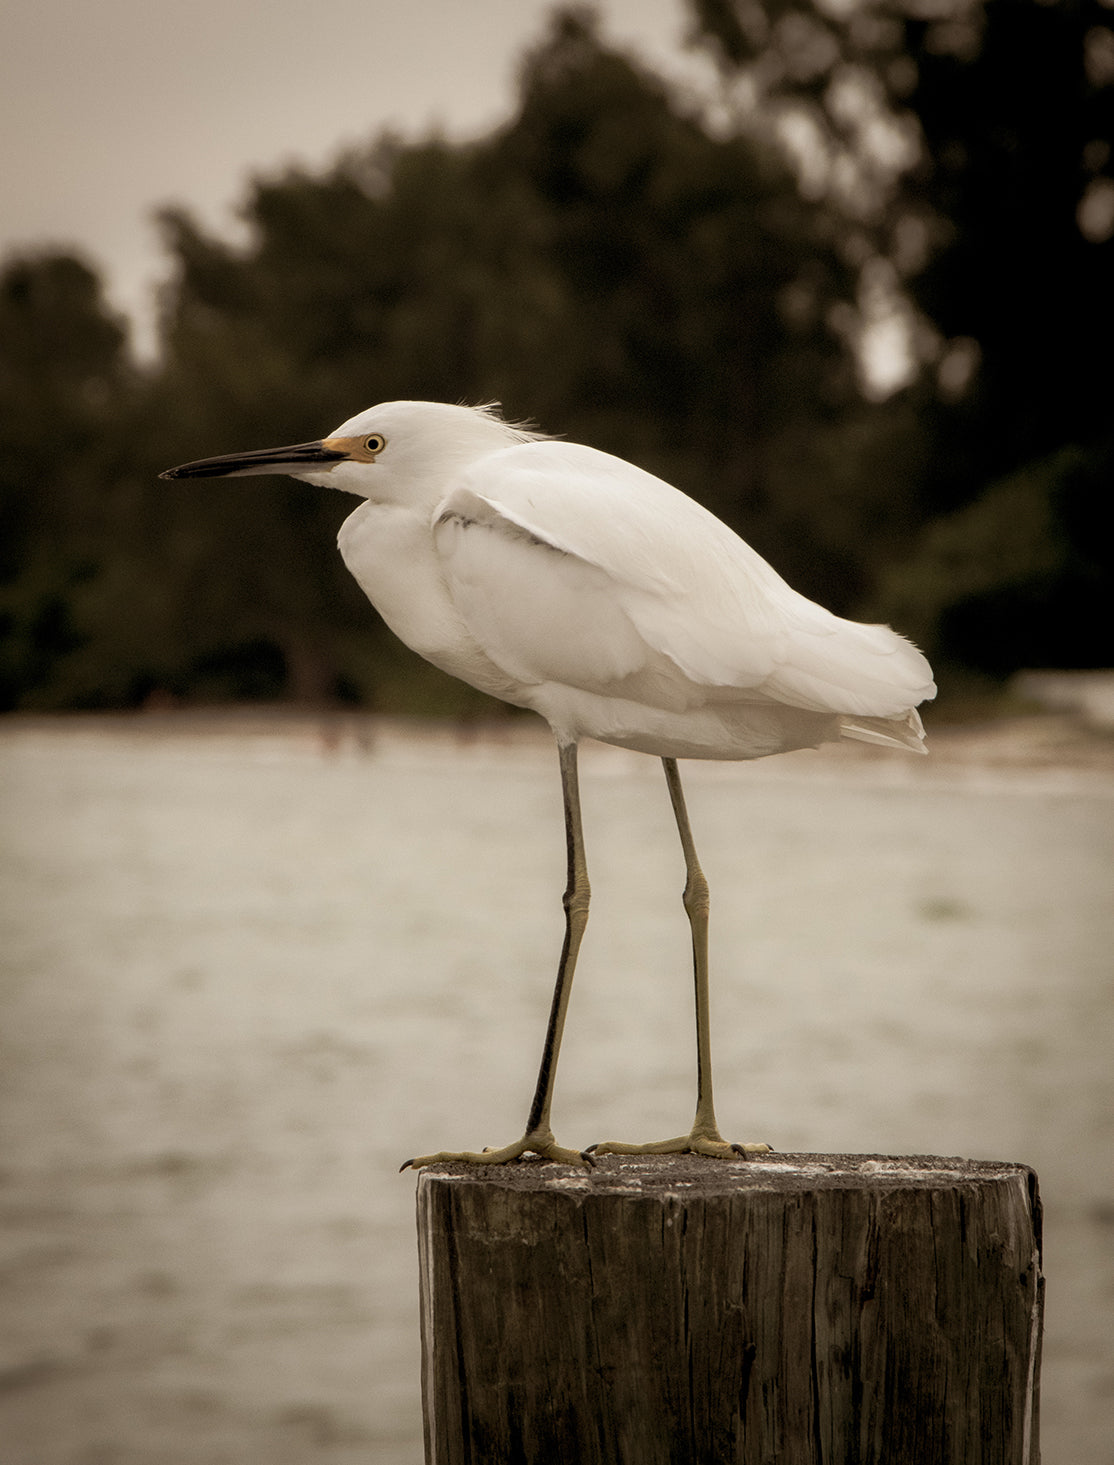 Formal Living Room Wall Decor: Aged Colorized Snowy Egret on Pillar Wildlife Photo Fine Art Canvas & Unframed Wall Art Prints  - PIPAFINEART